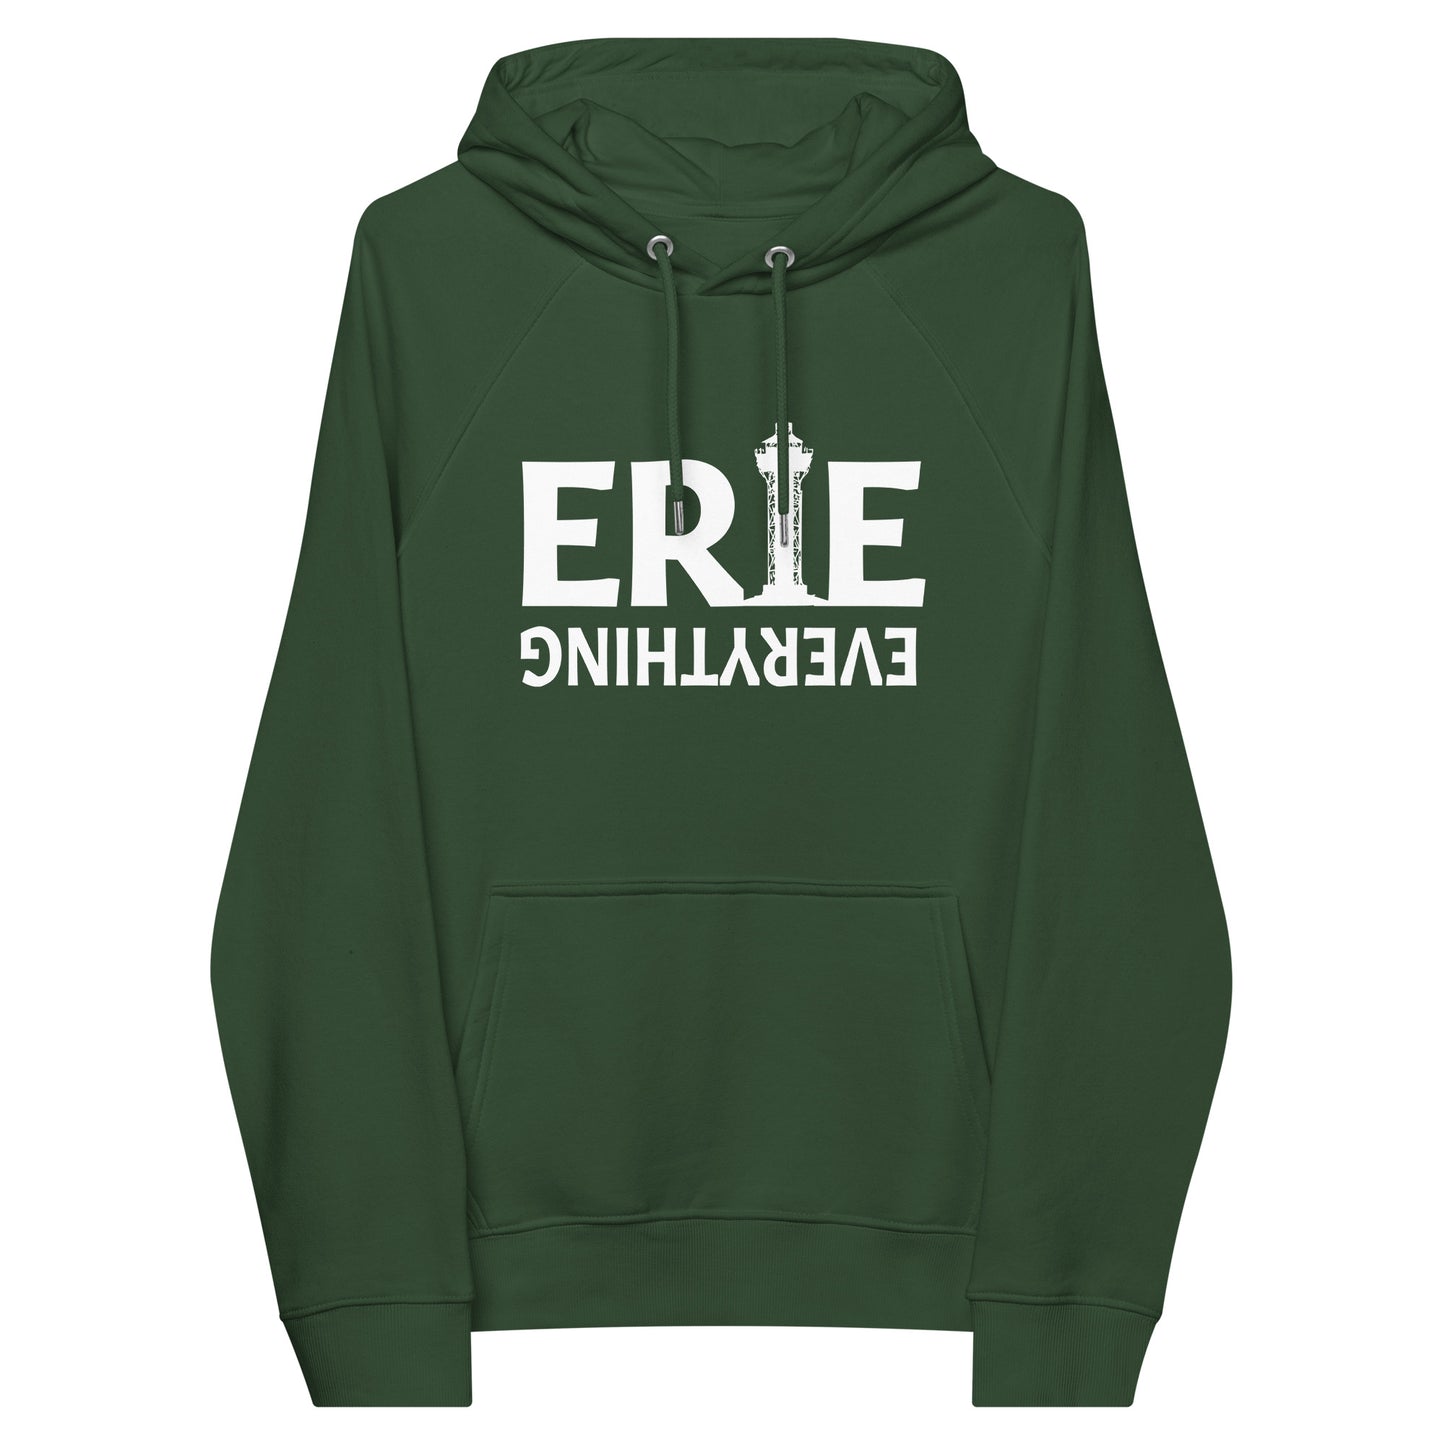 Erie Over Everything Unisex Hoodie